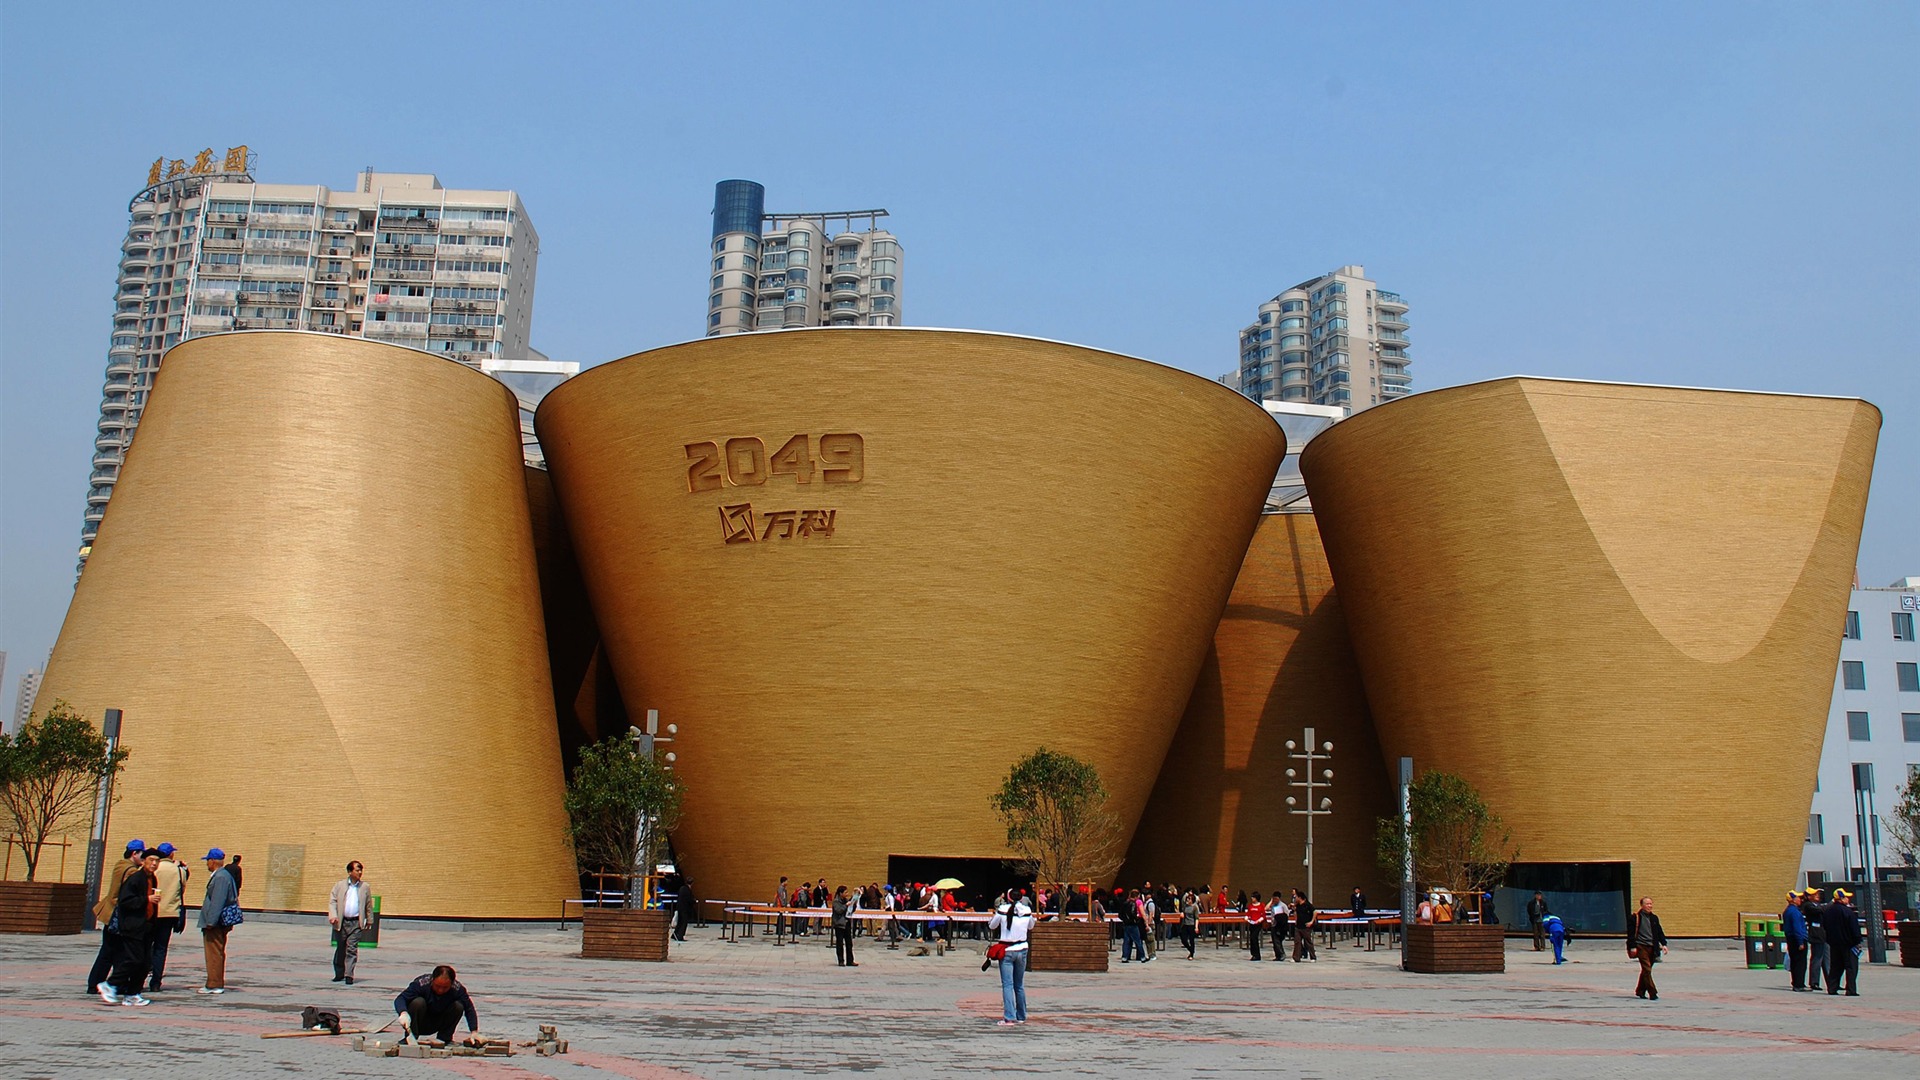 Commissioning of the 2010 Shanghai World Expo (studious works) #17 - 1920x1080